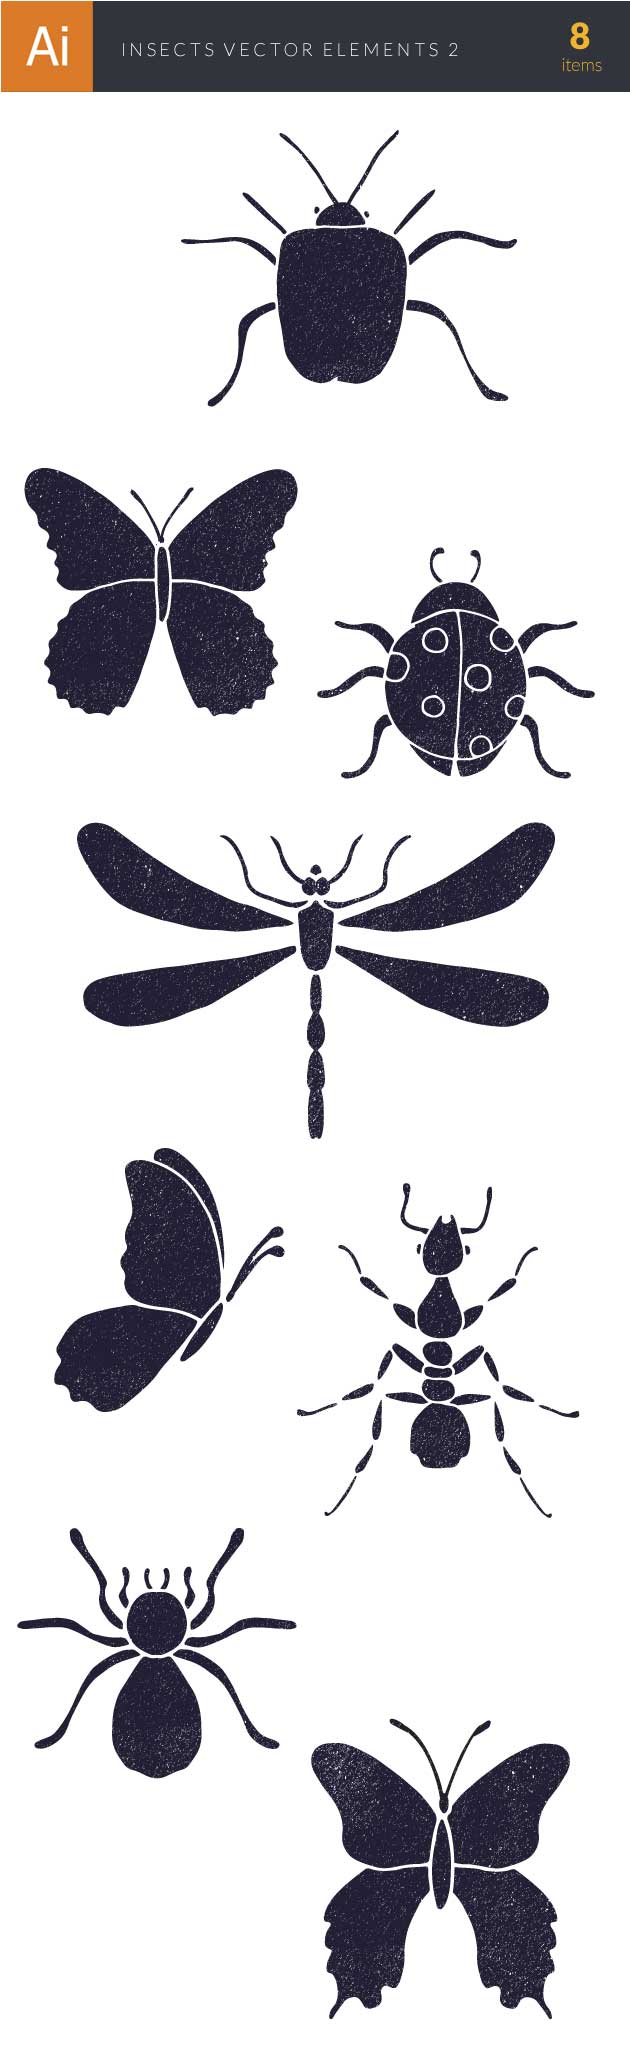 Insects Vector Elements Set 2 51